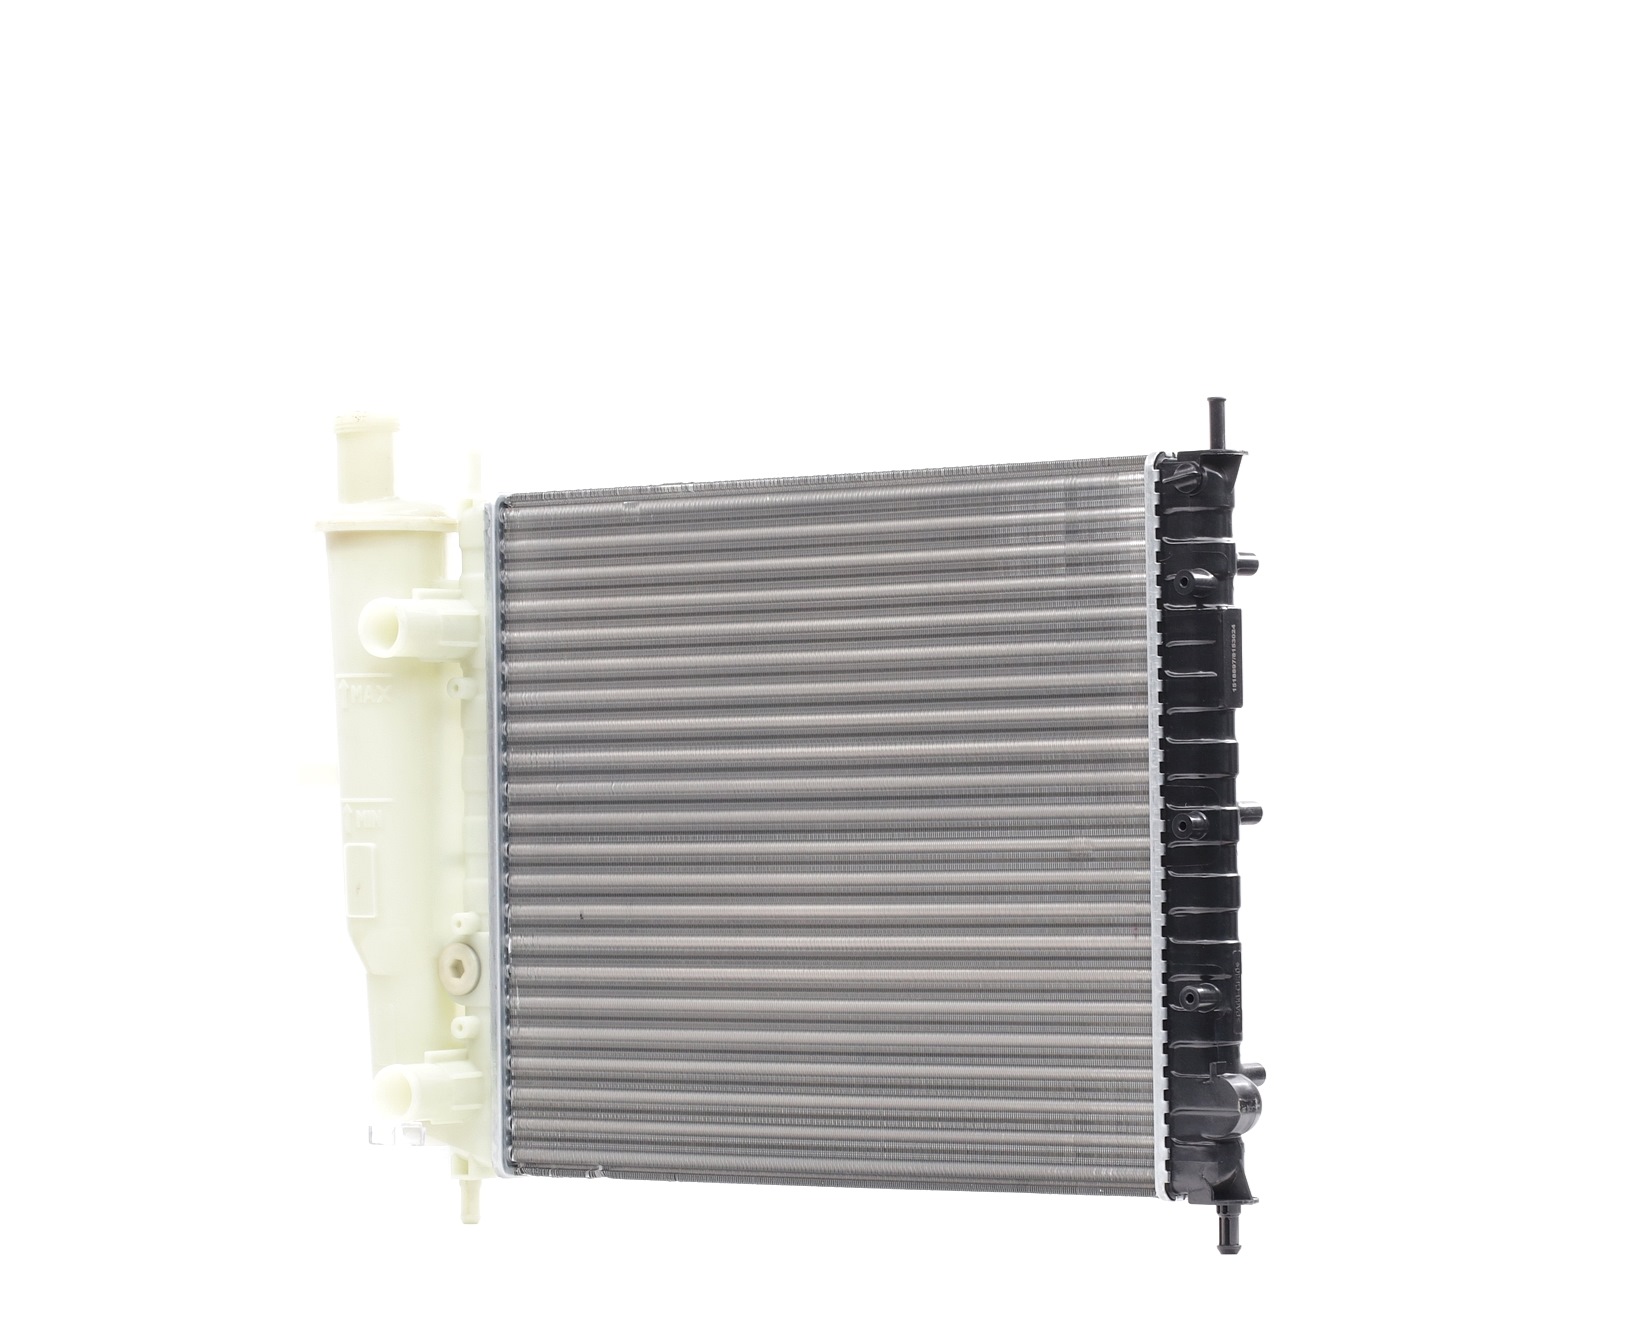 RIDEX 470R0374 Engine radiator Aluminium, 415 x 480 x 23 mm, Mechanically jointed cooling fins